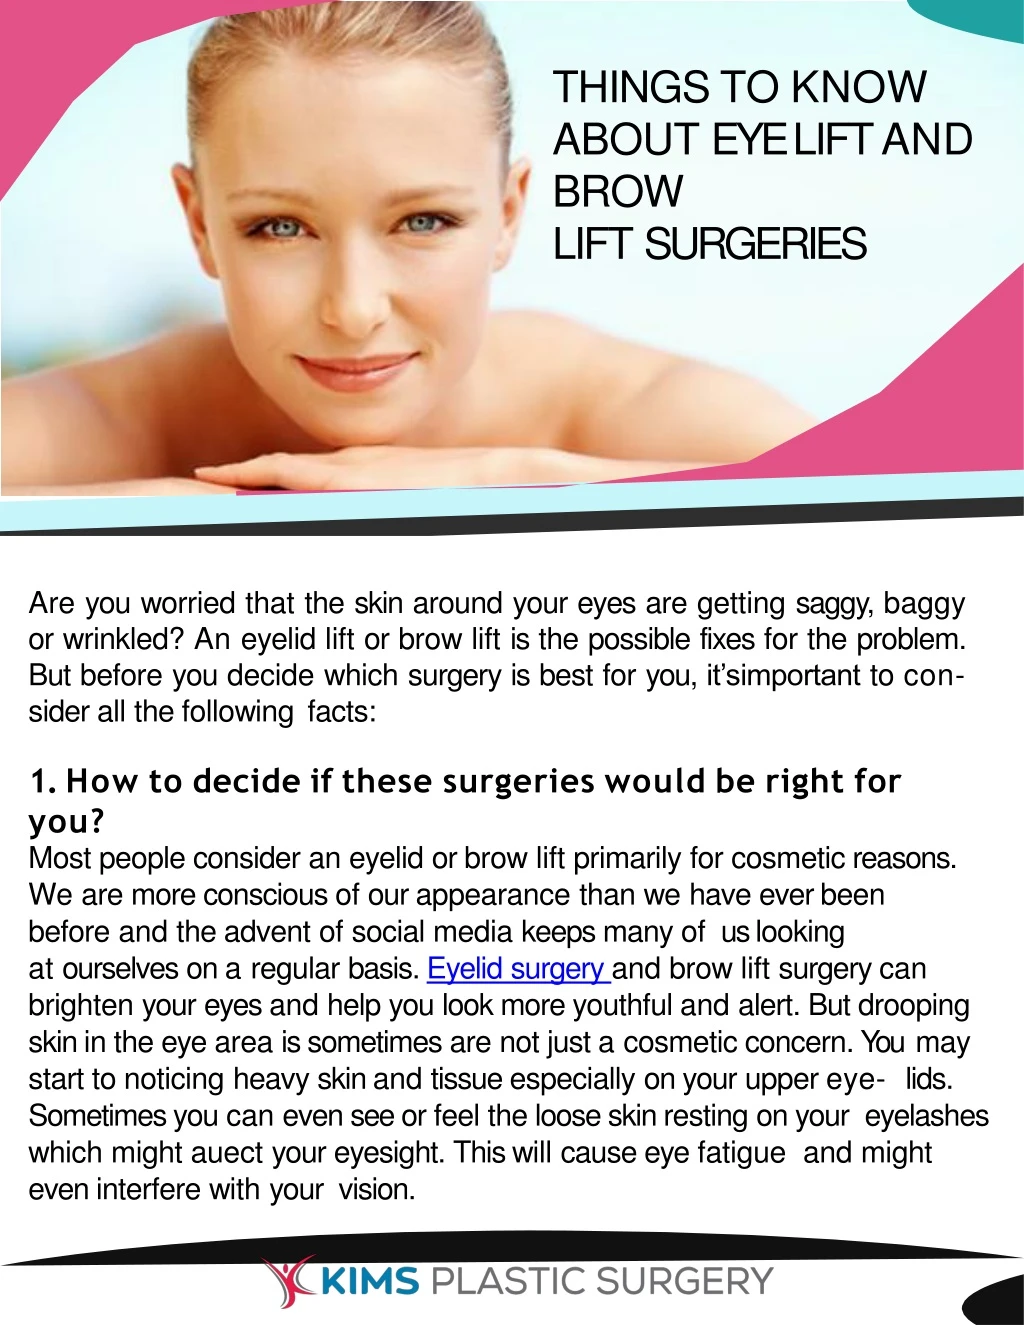 things to know about eye lift and brow lift surgeries